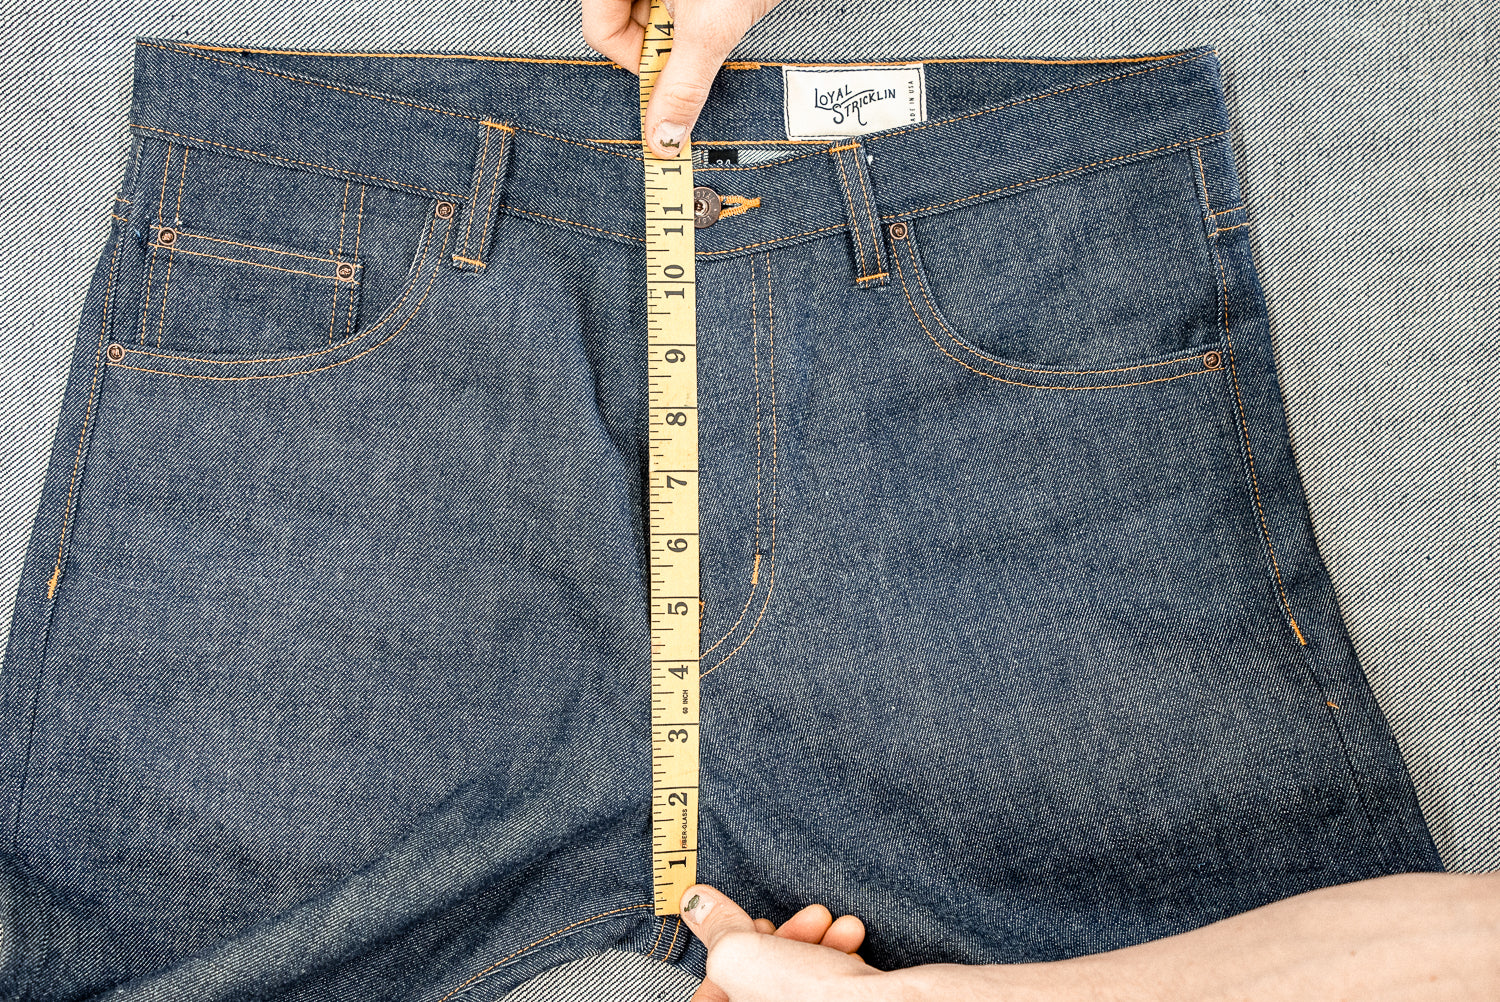 How to Measure your Jeans – Loyal Stricklin